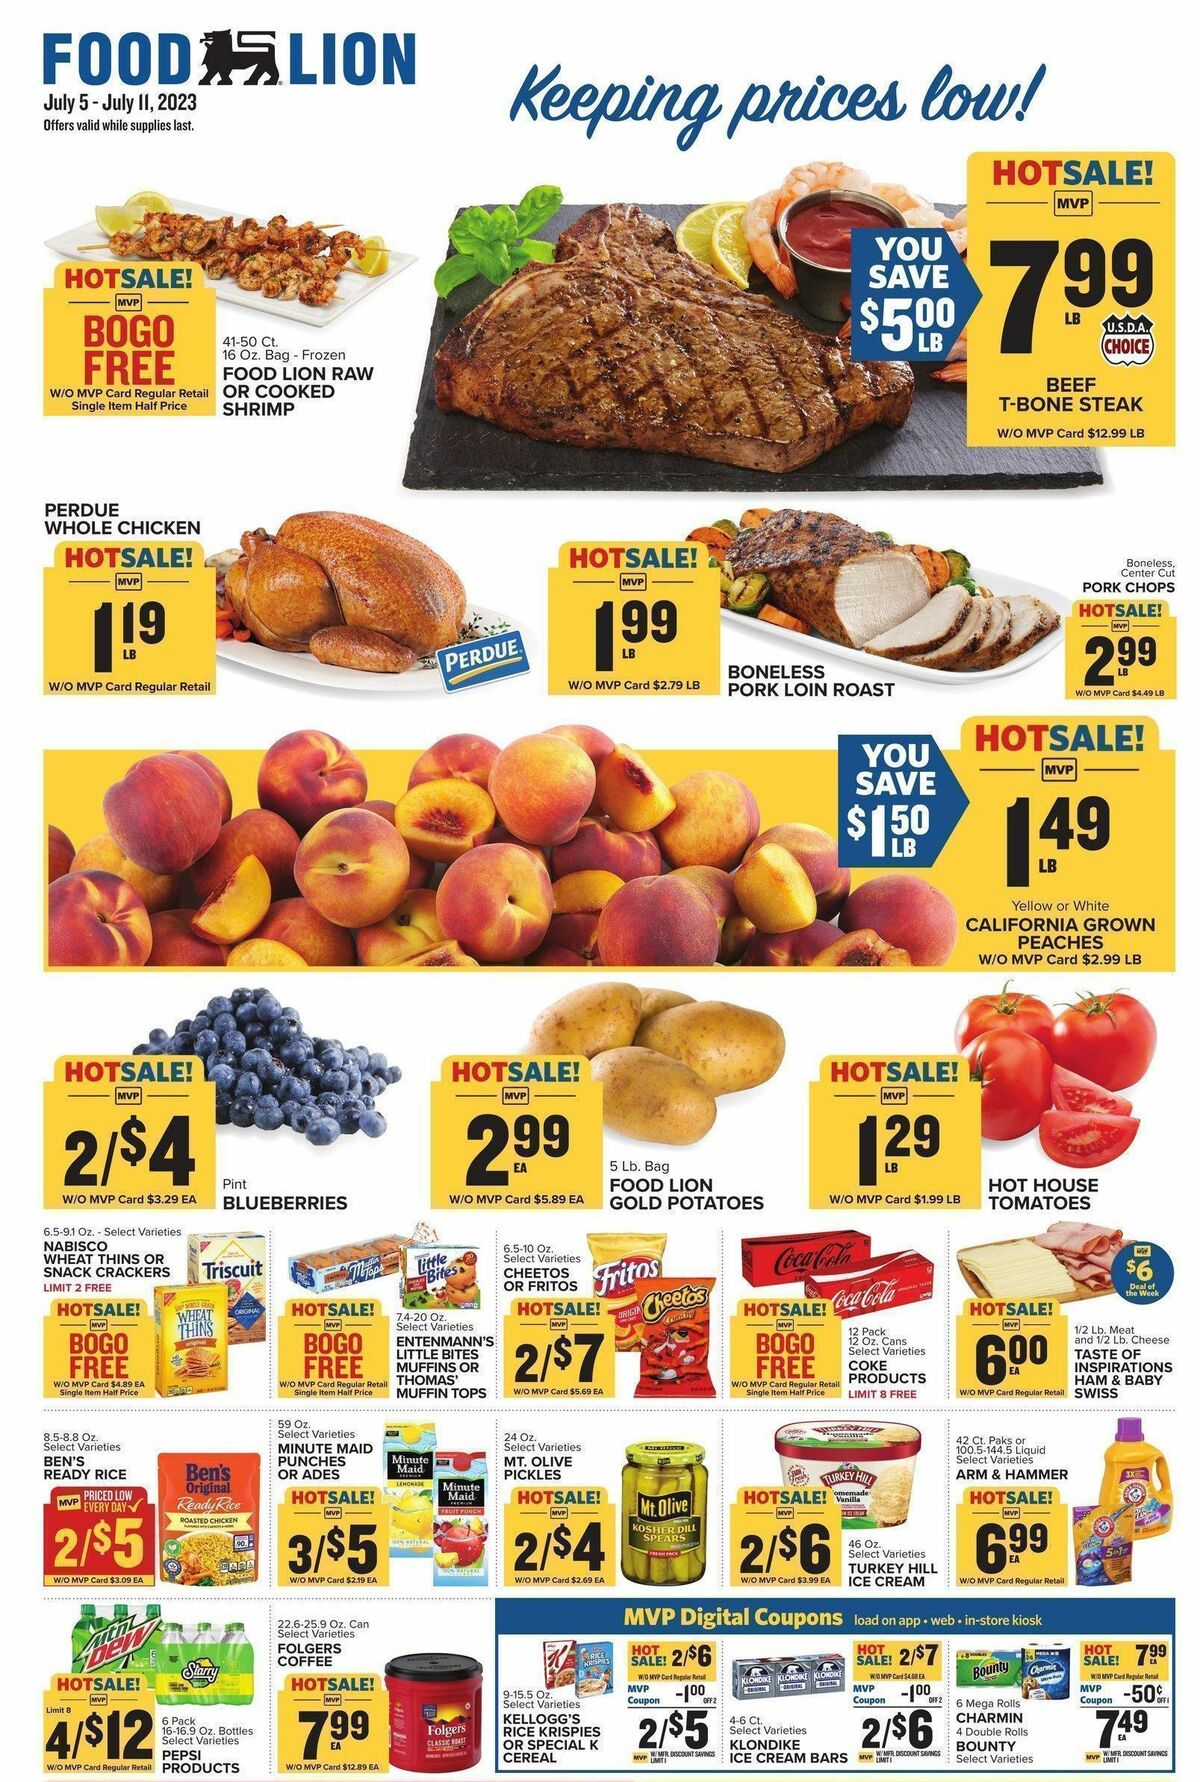 Food Lion Weekly Ad from July 5